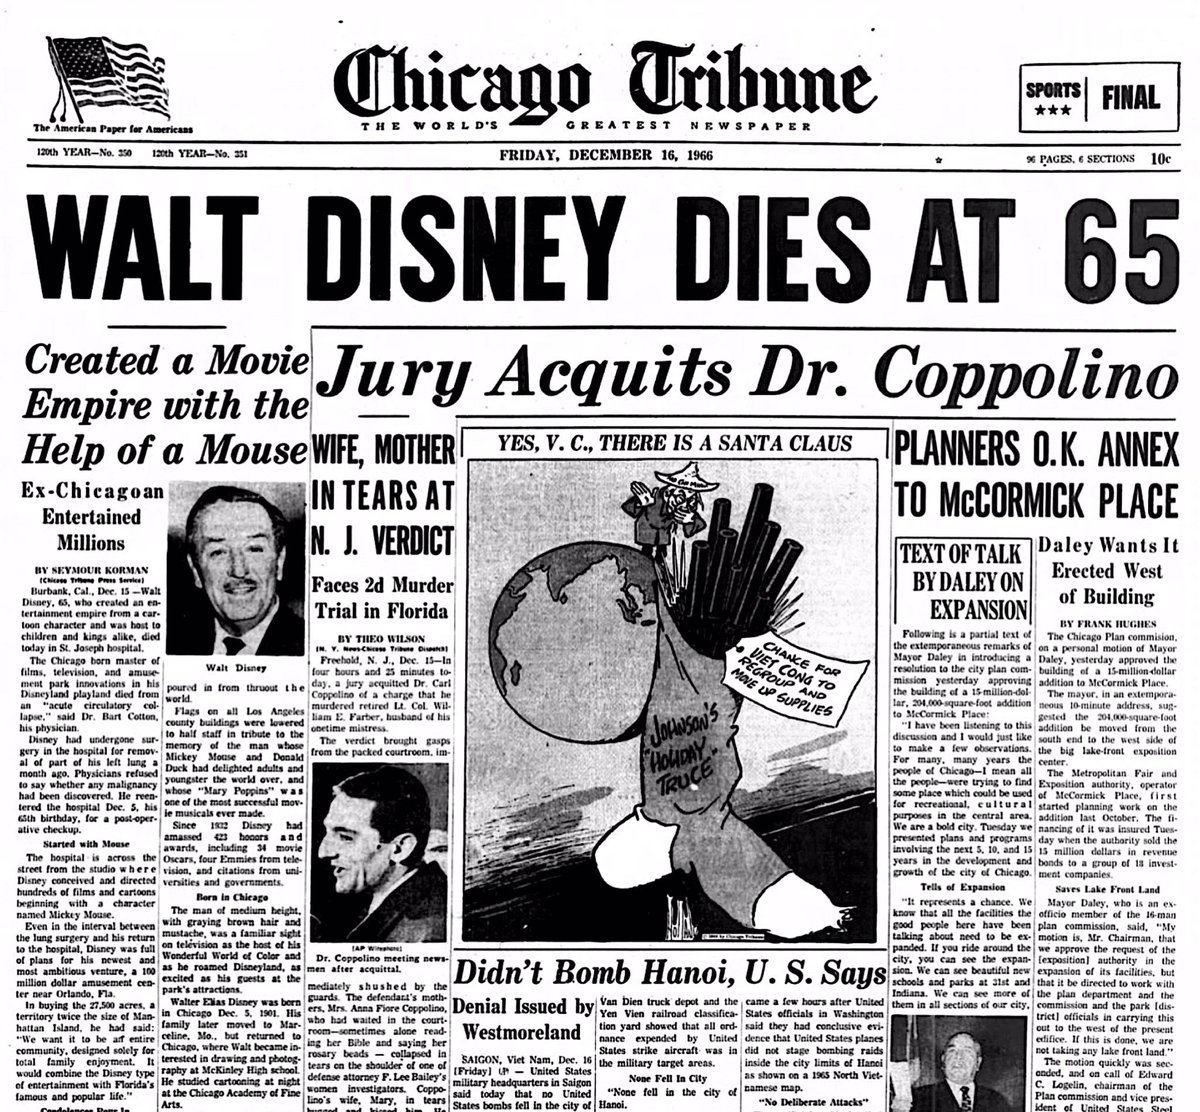 RetroNewsNow on Twitter: "On December 15, 1966, Walt Disney died at the age of 65 https://t.co/TzaNINnQPK" / Twitter